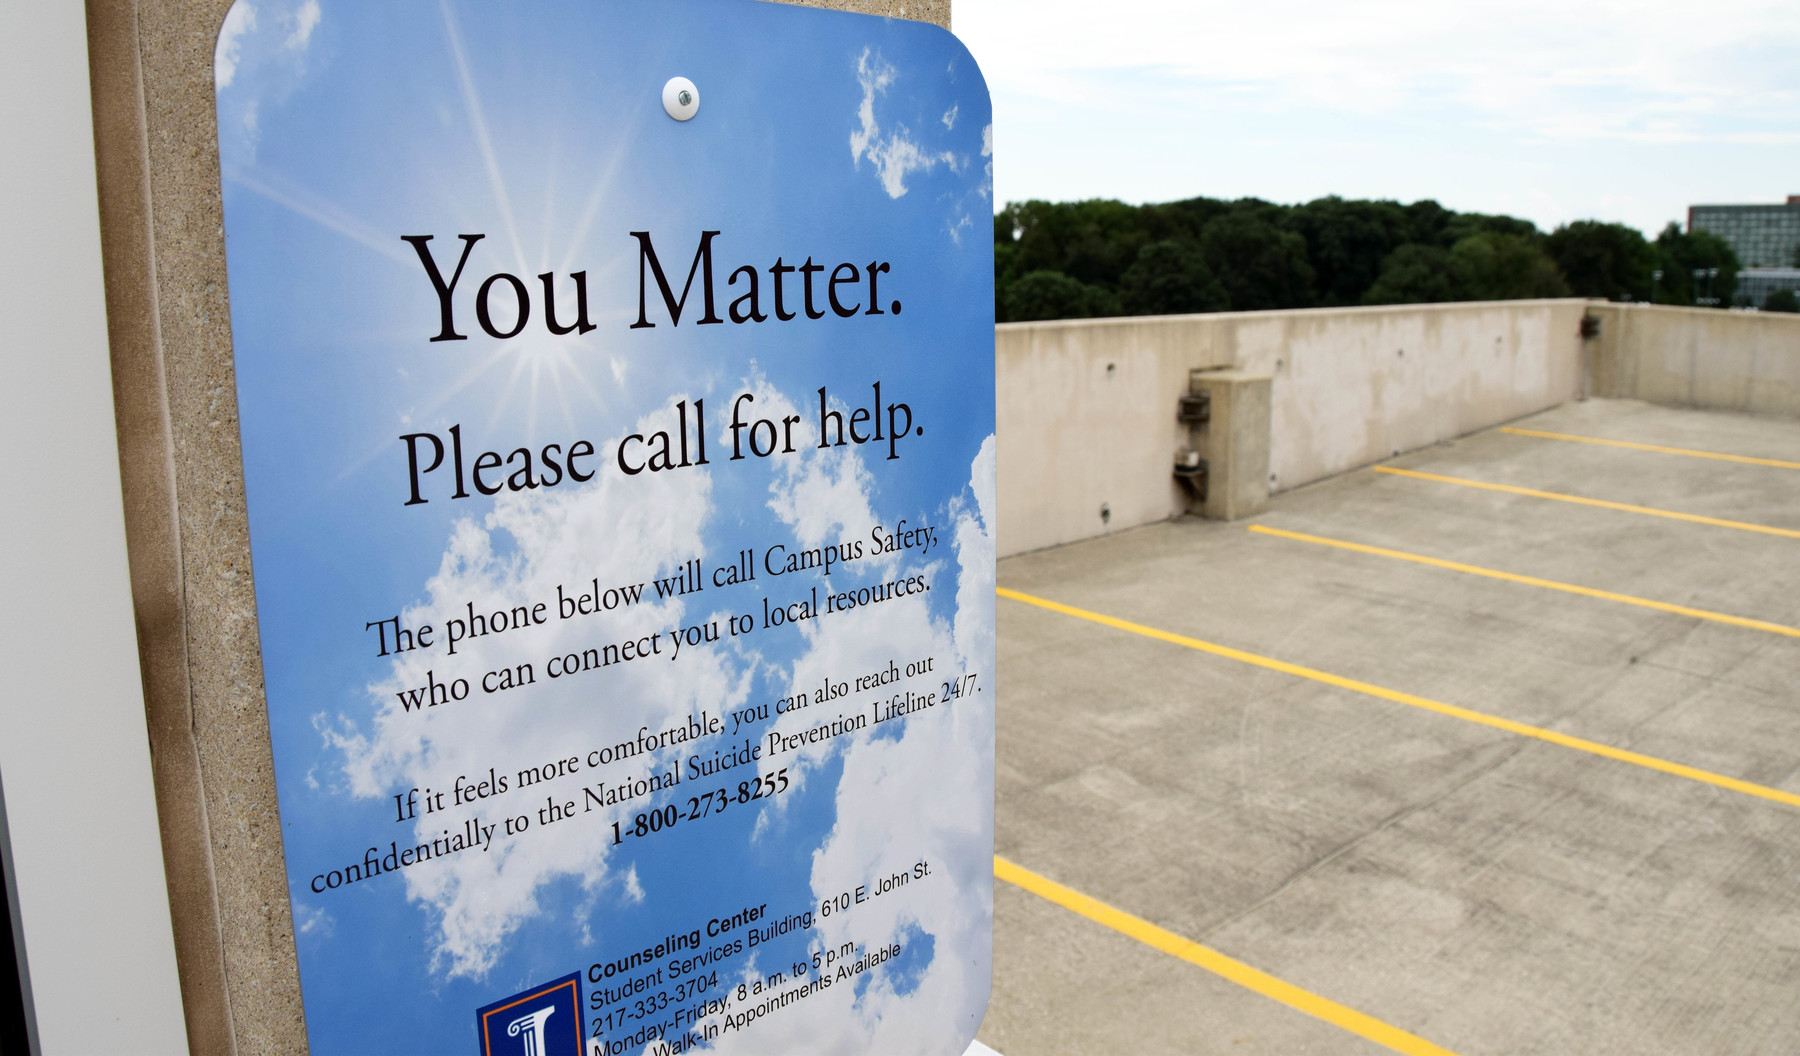 A you matter sign advertising for the University of Illinois Counseling Center.